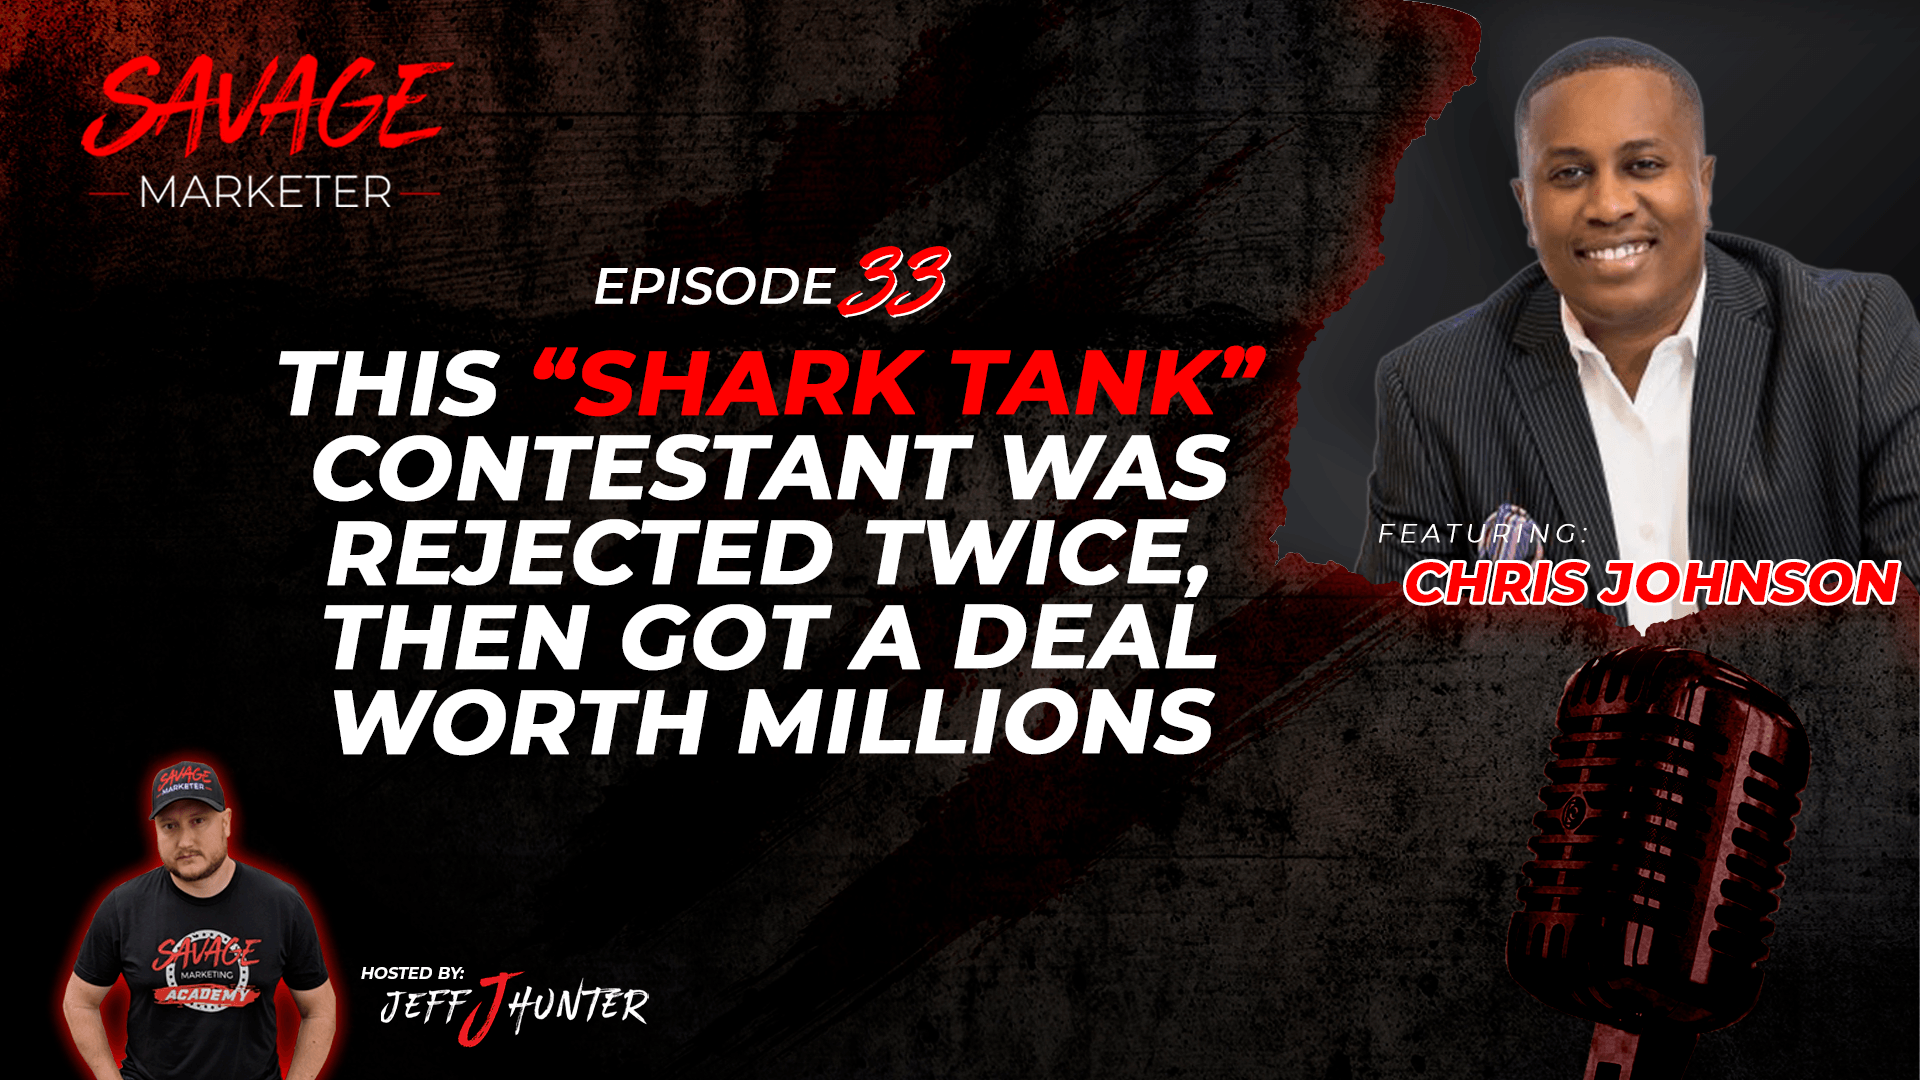 This “Shark Tank” Contestant Was Rejected Twice, Then Got A Deal Worth Millions FT. Christ Johnson